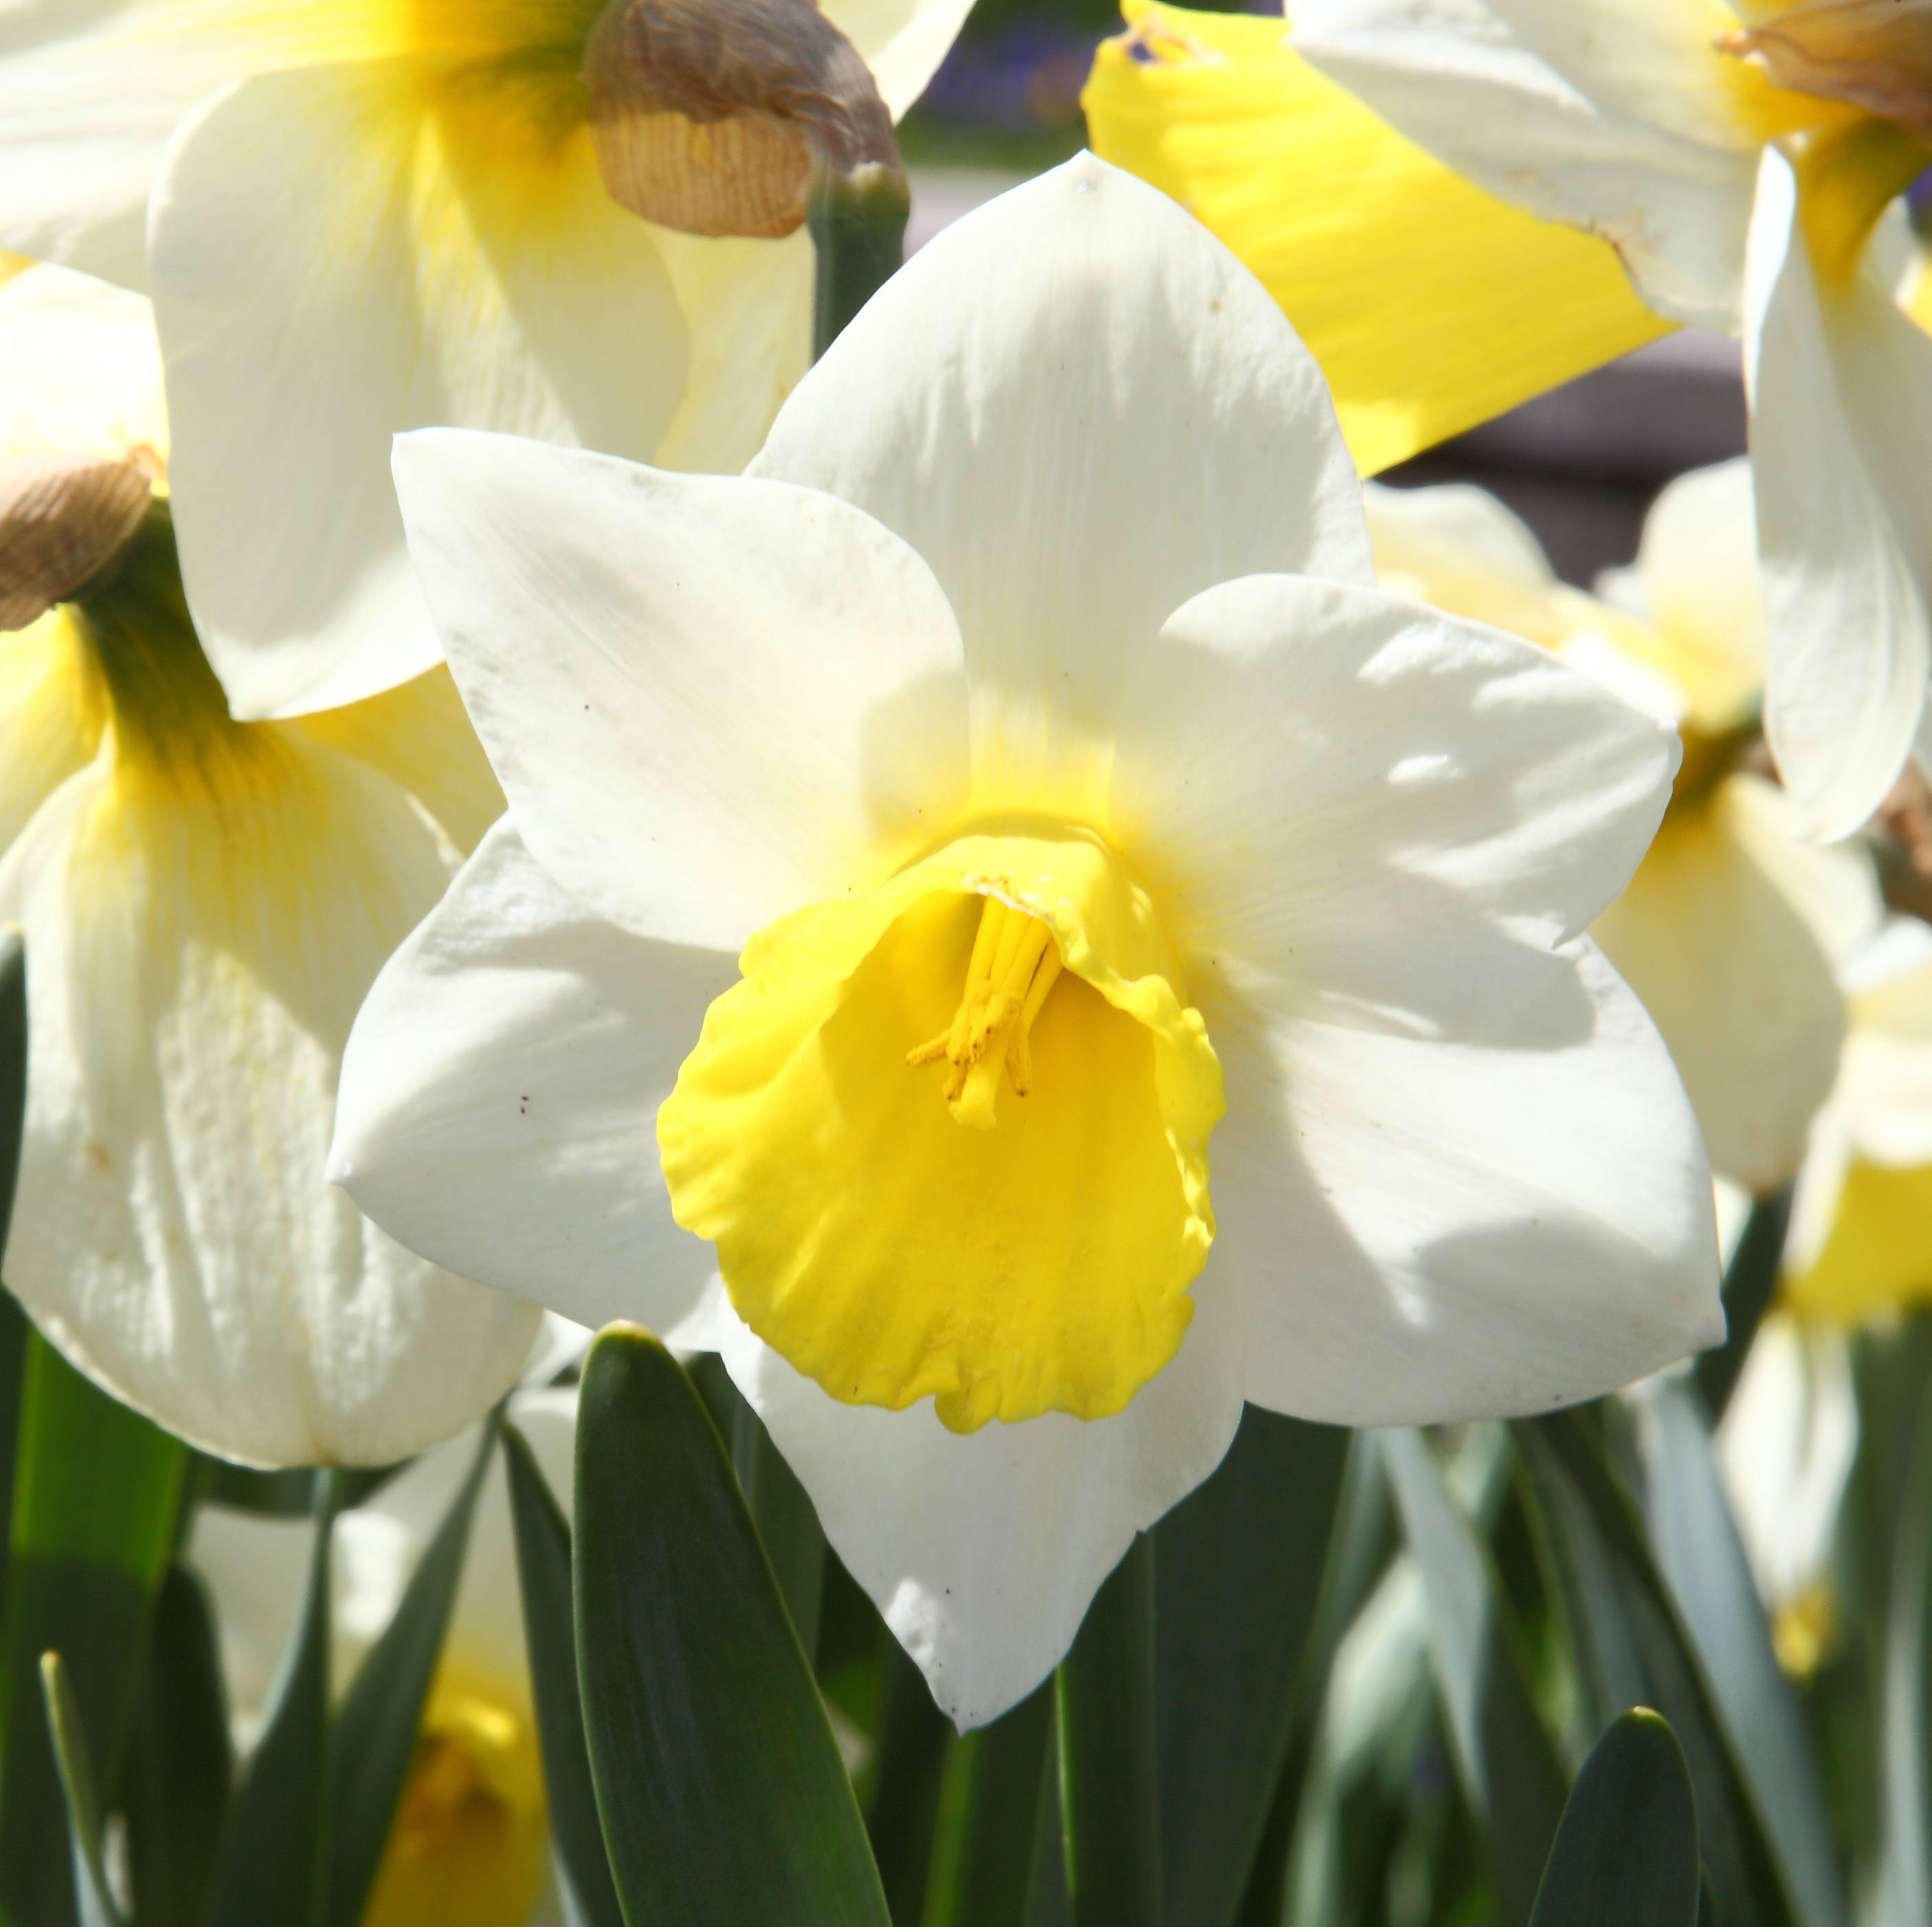 
Narcissus 'Bravoure'; white-yellow, smooth flowers with yellow, cup-like corona, yellow stamens, blue-green, slender stems, and blue-green, narrow, smooth leaves
